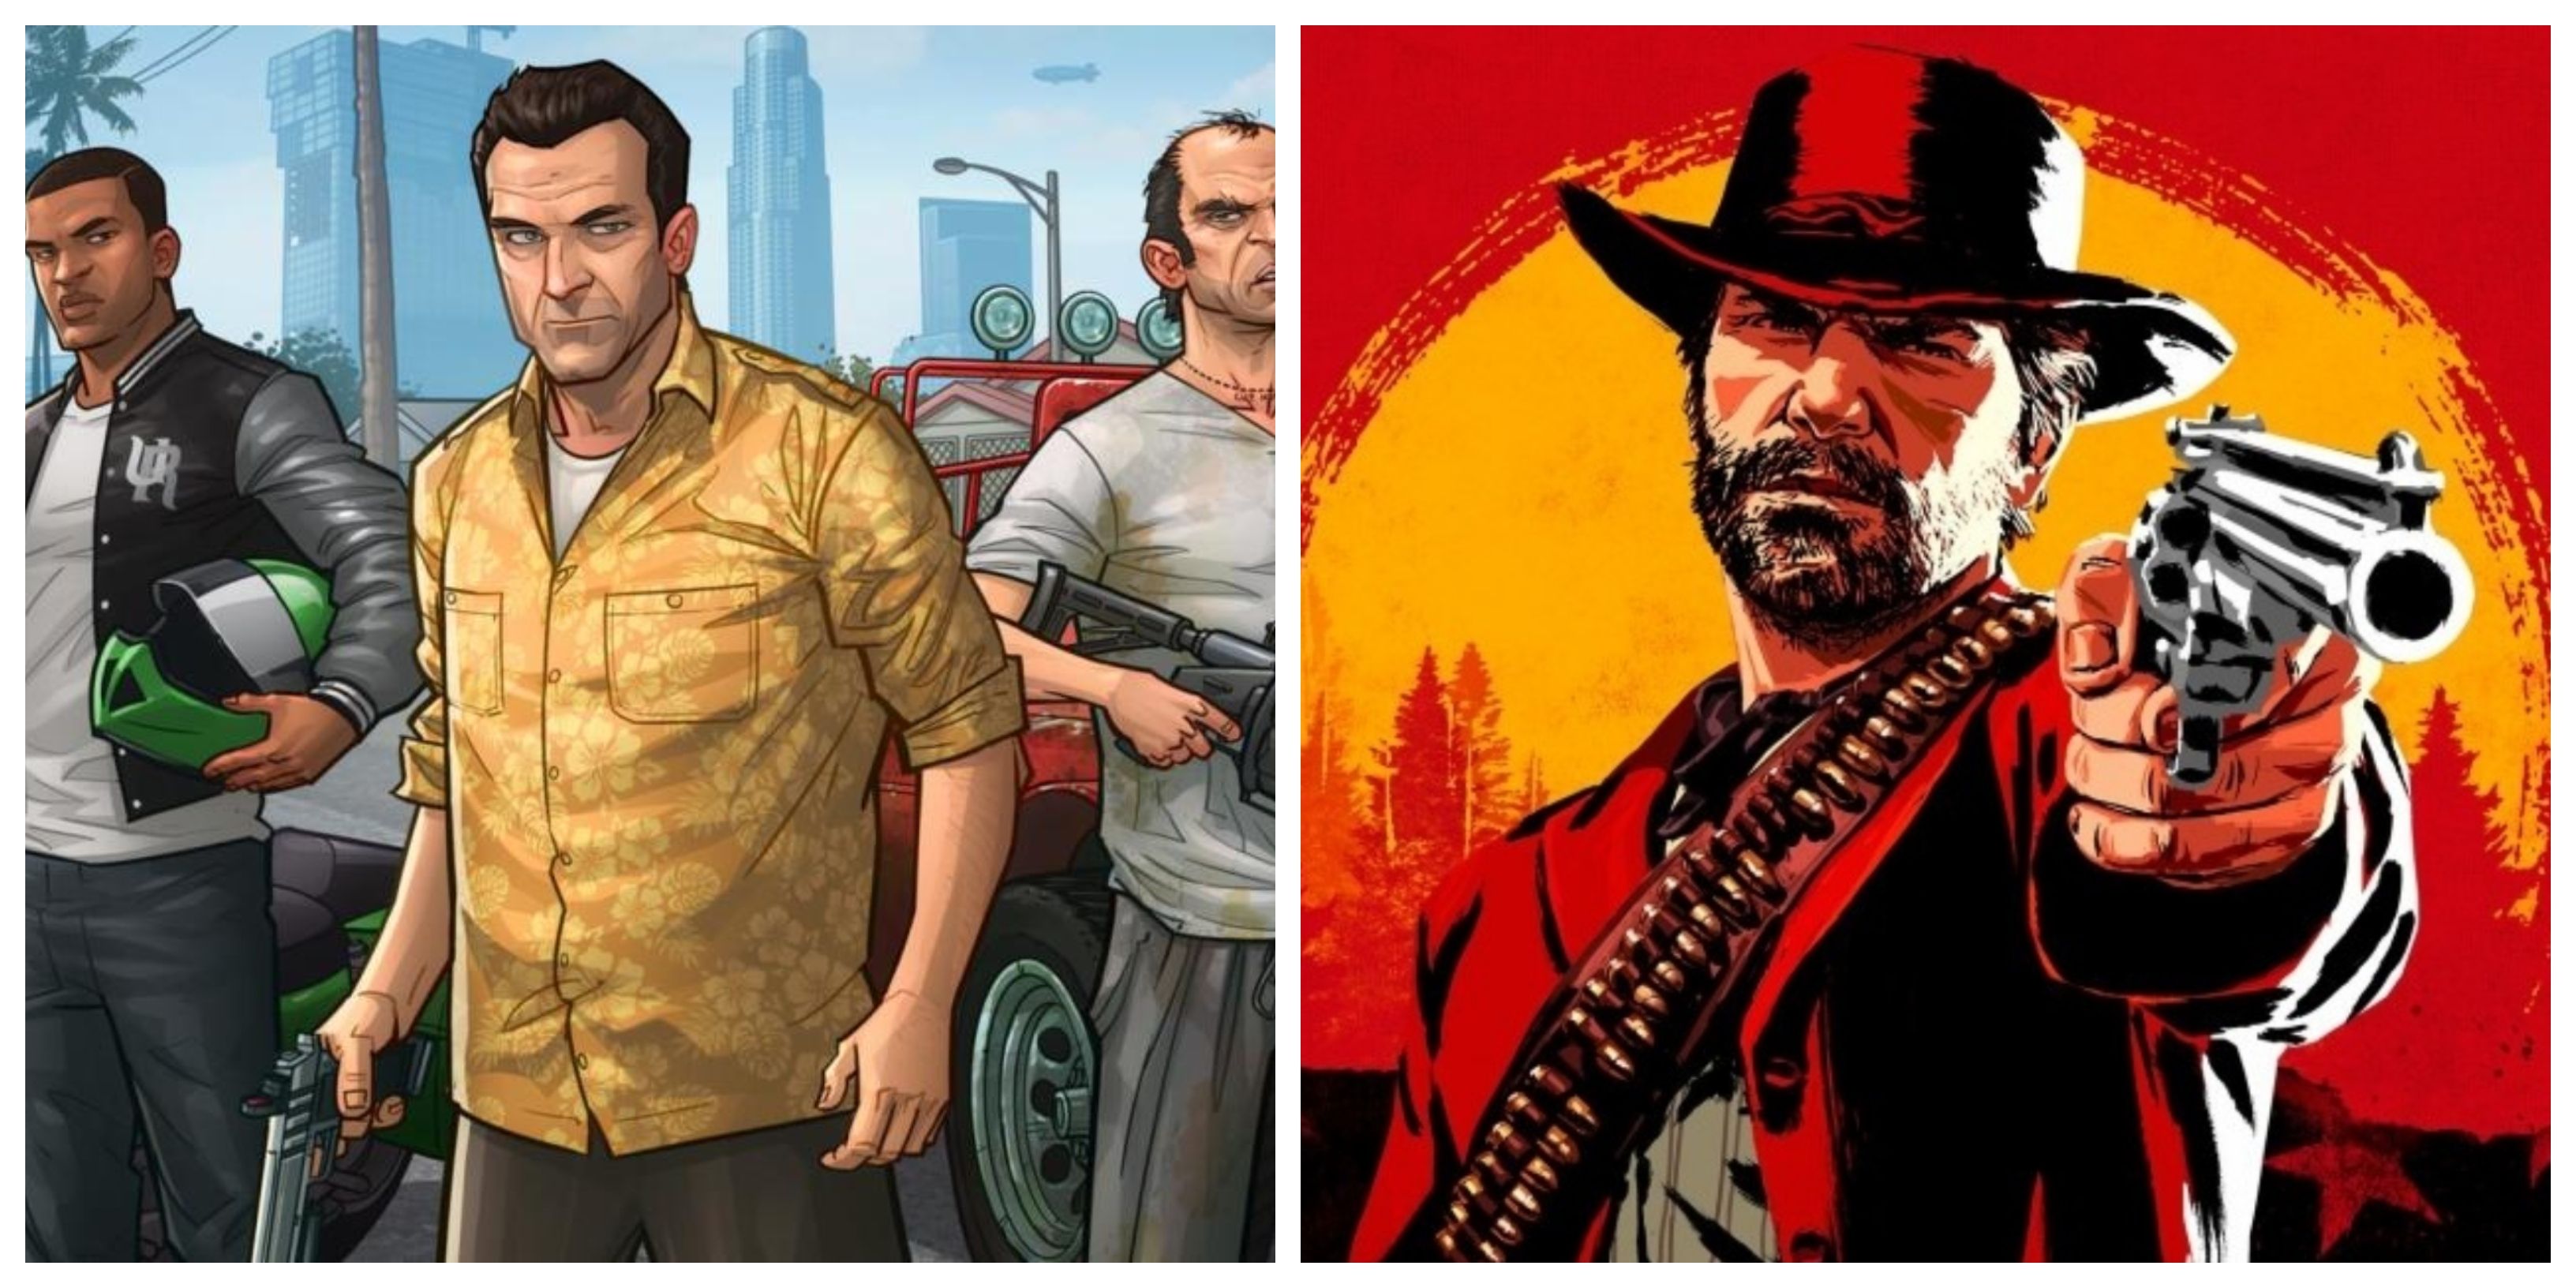 GTA 5 Reaches 110 Million Copies Sold As Red Dead Redemption 2 Hits 24Million Milestone